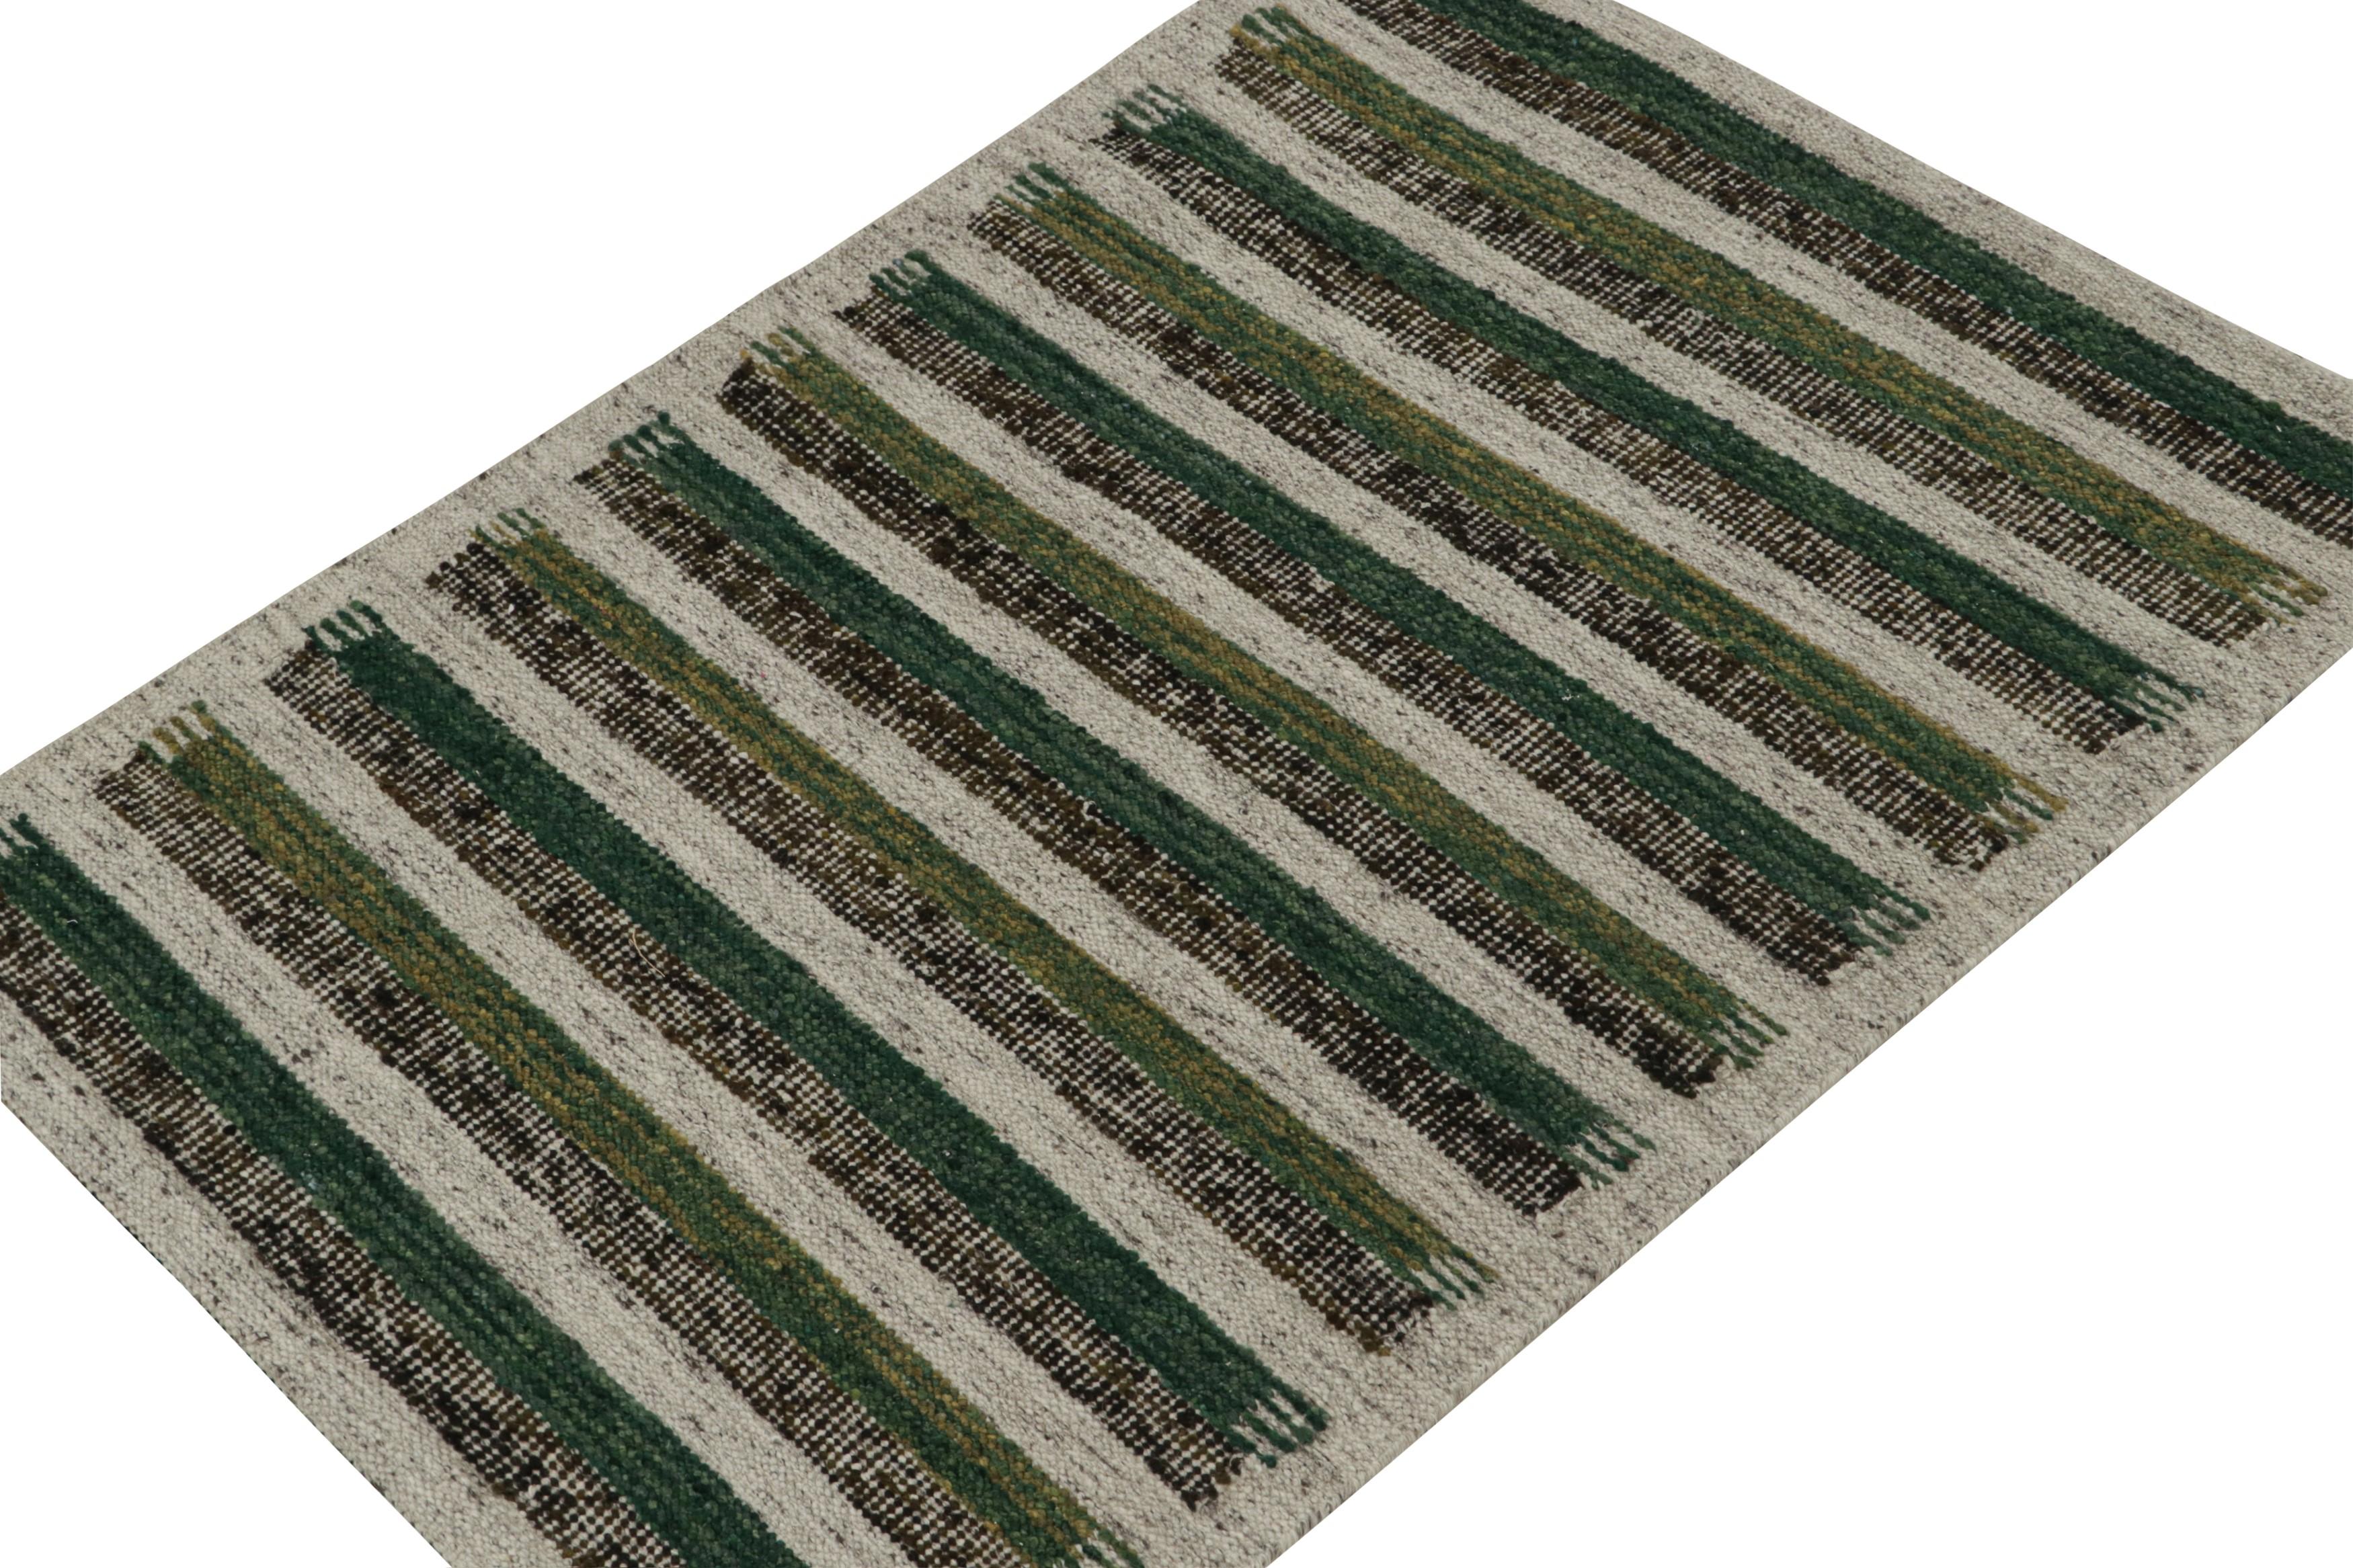 This 5x7 Swedish style kilim is from the inventive “Nu” texture in Rug & Kilim’s award-winning Scandinavian flat weave collection. Handwoven in fine yarn.

Further On the Design: 

This rug enjoys a boucle-like texture of blended yarns, and a look